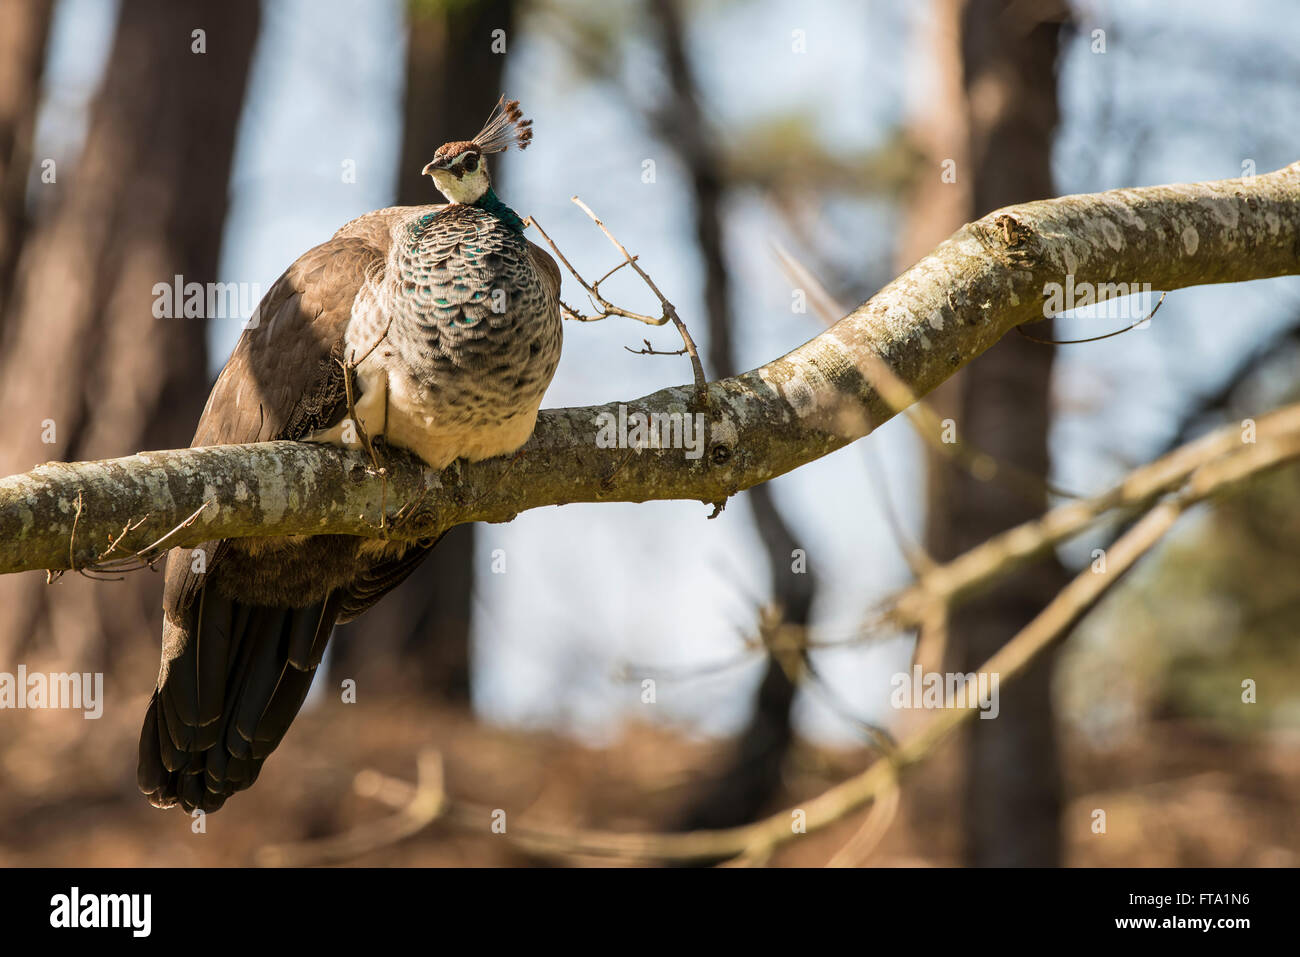 Beautiful peahen roosting in forest landscape Stock Photo